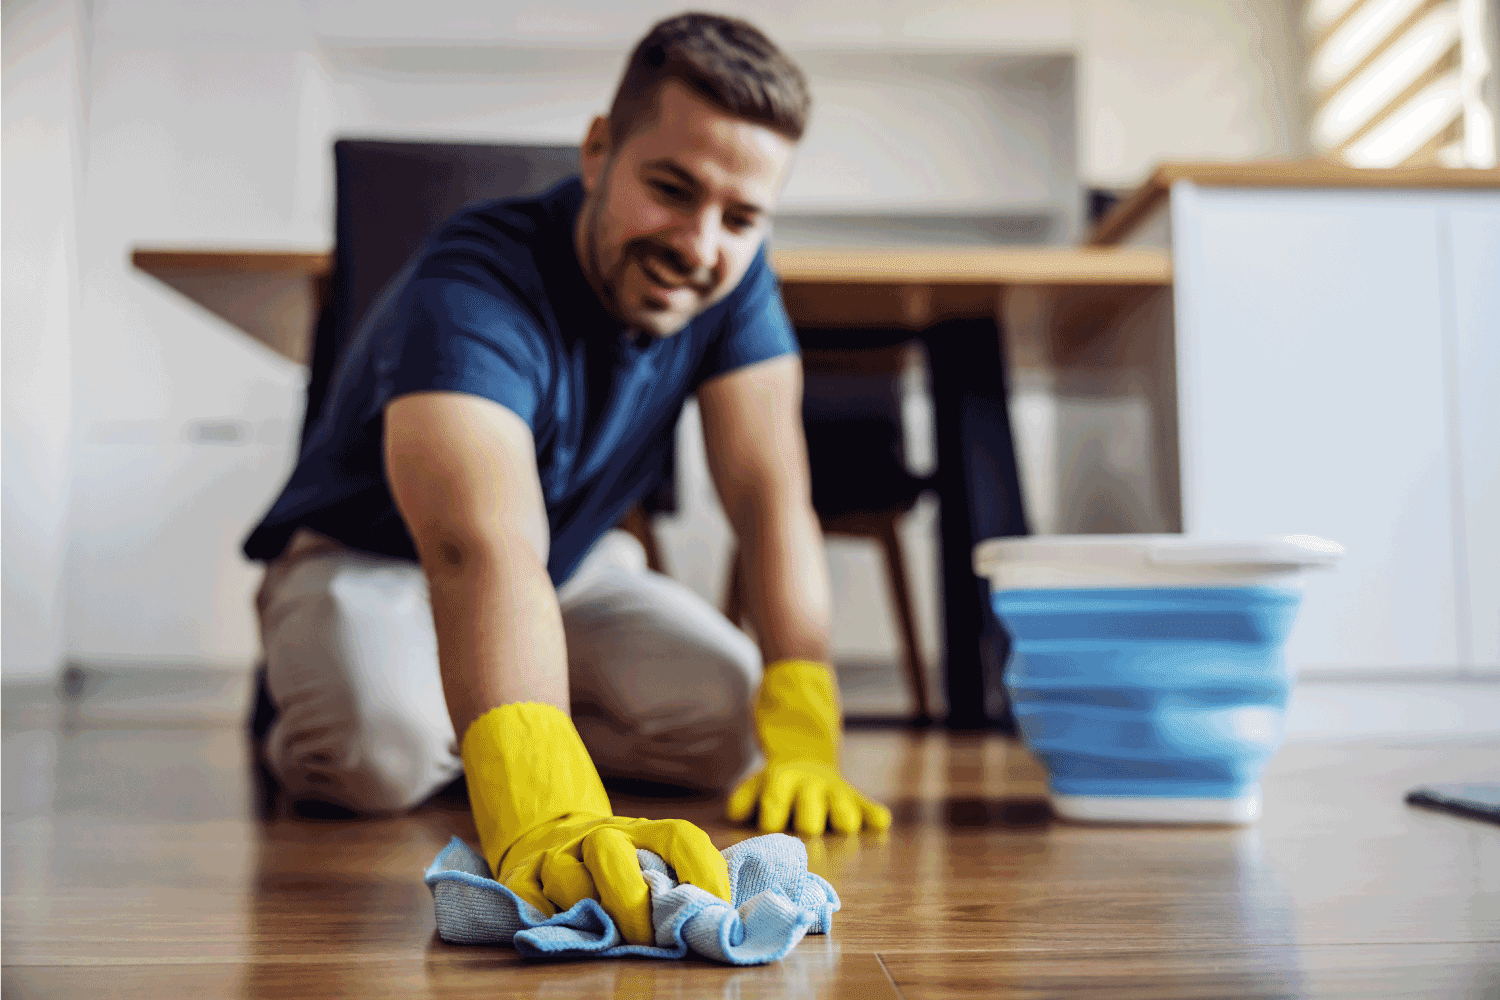 Man waxing parquet at home. Selective focus on hand with cloth. Rubber gloves on hands